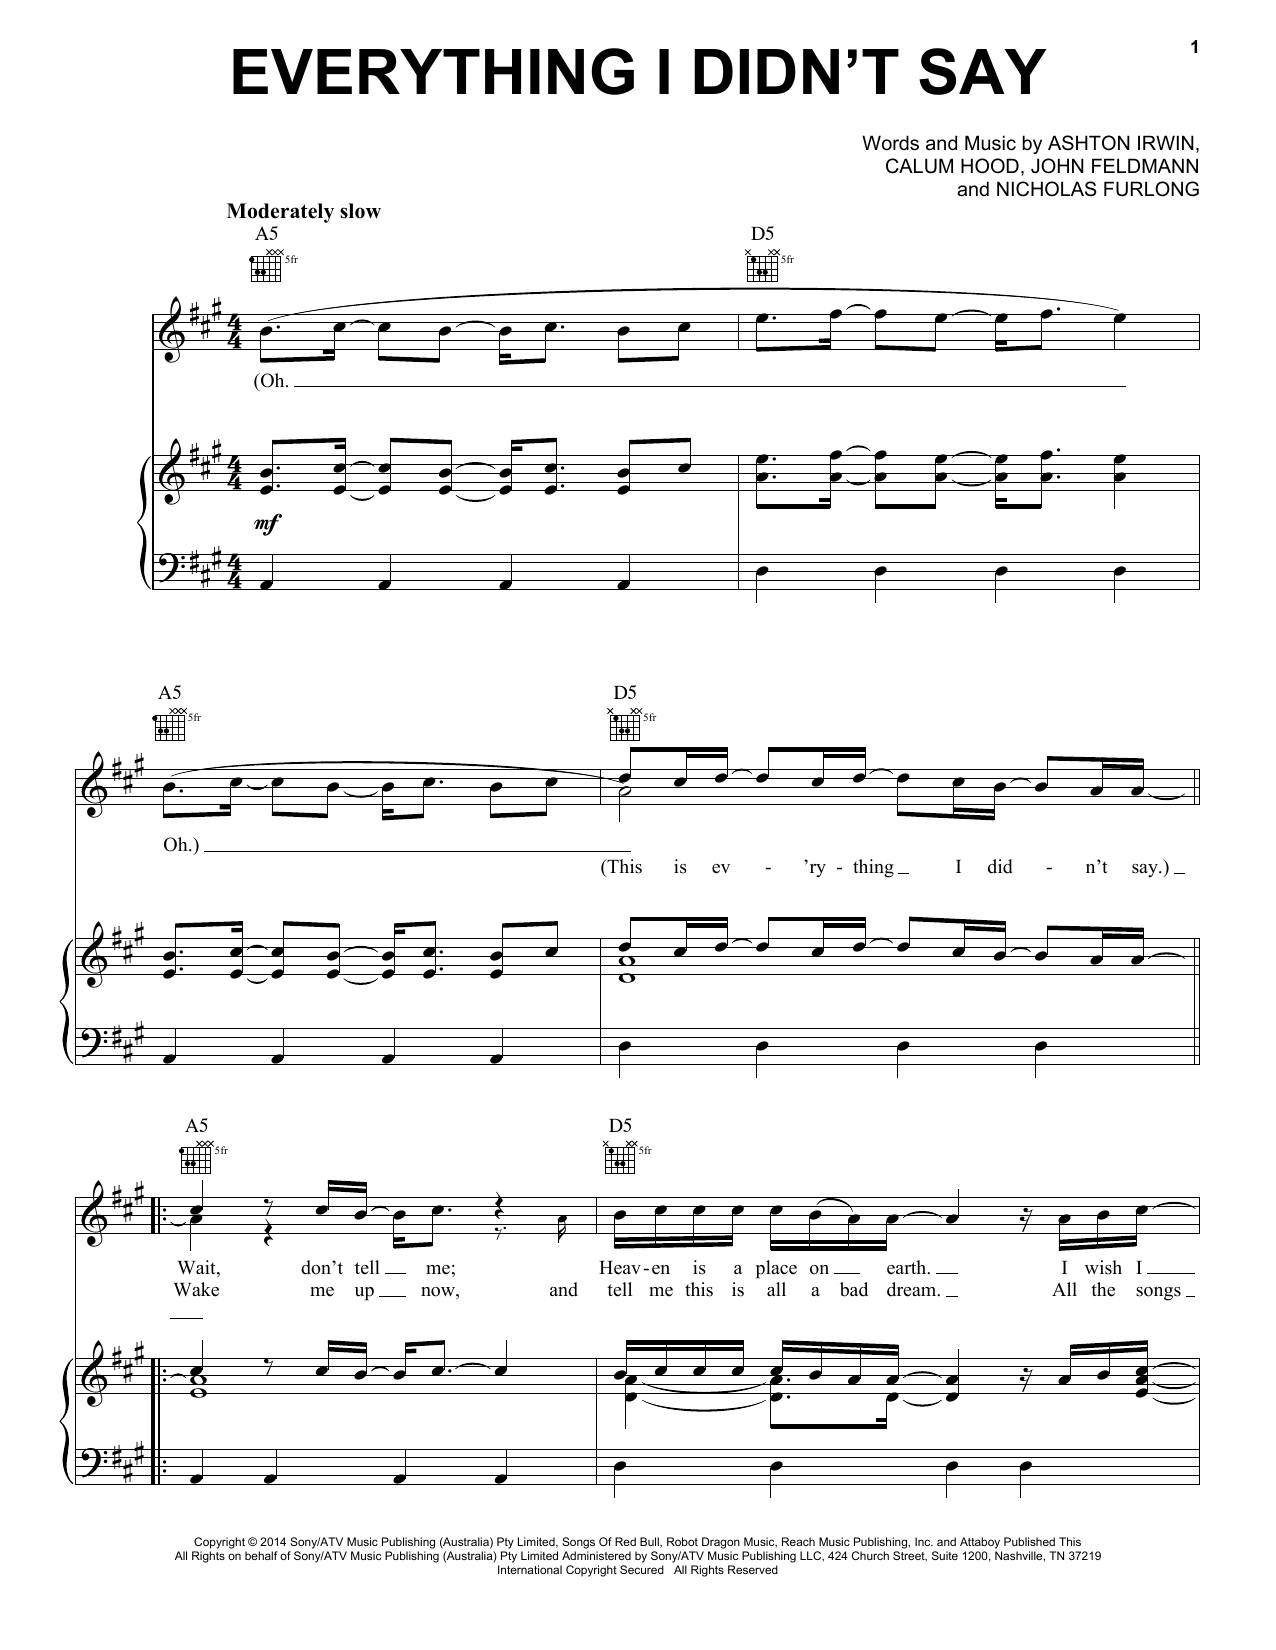 Download 5 Seconds of Summer Everything I Didn't Say Sheet Music